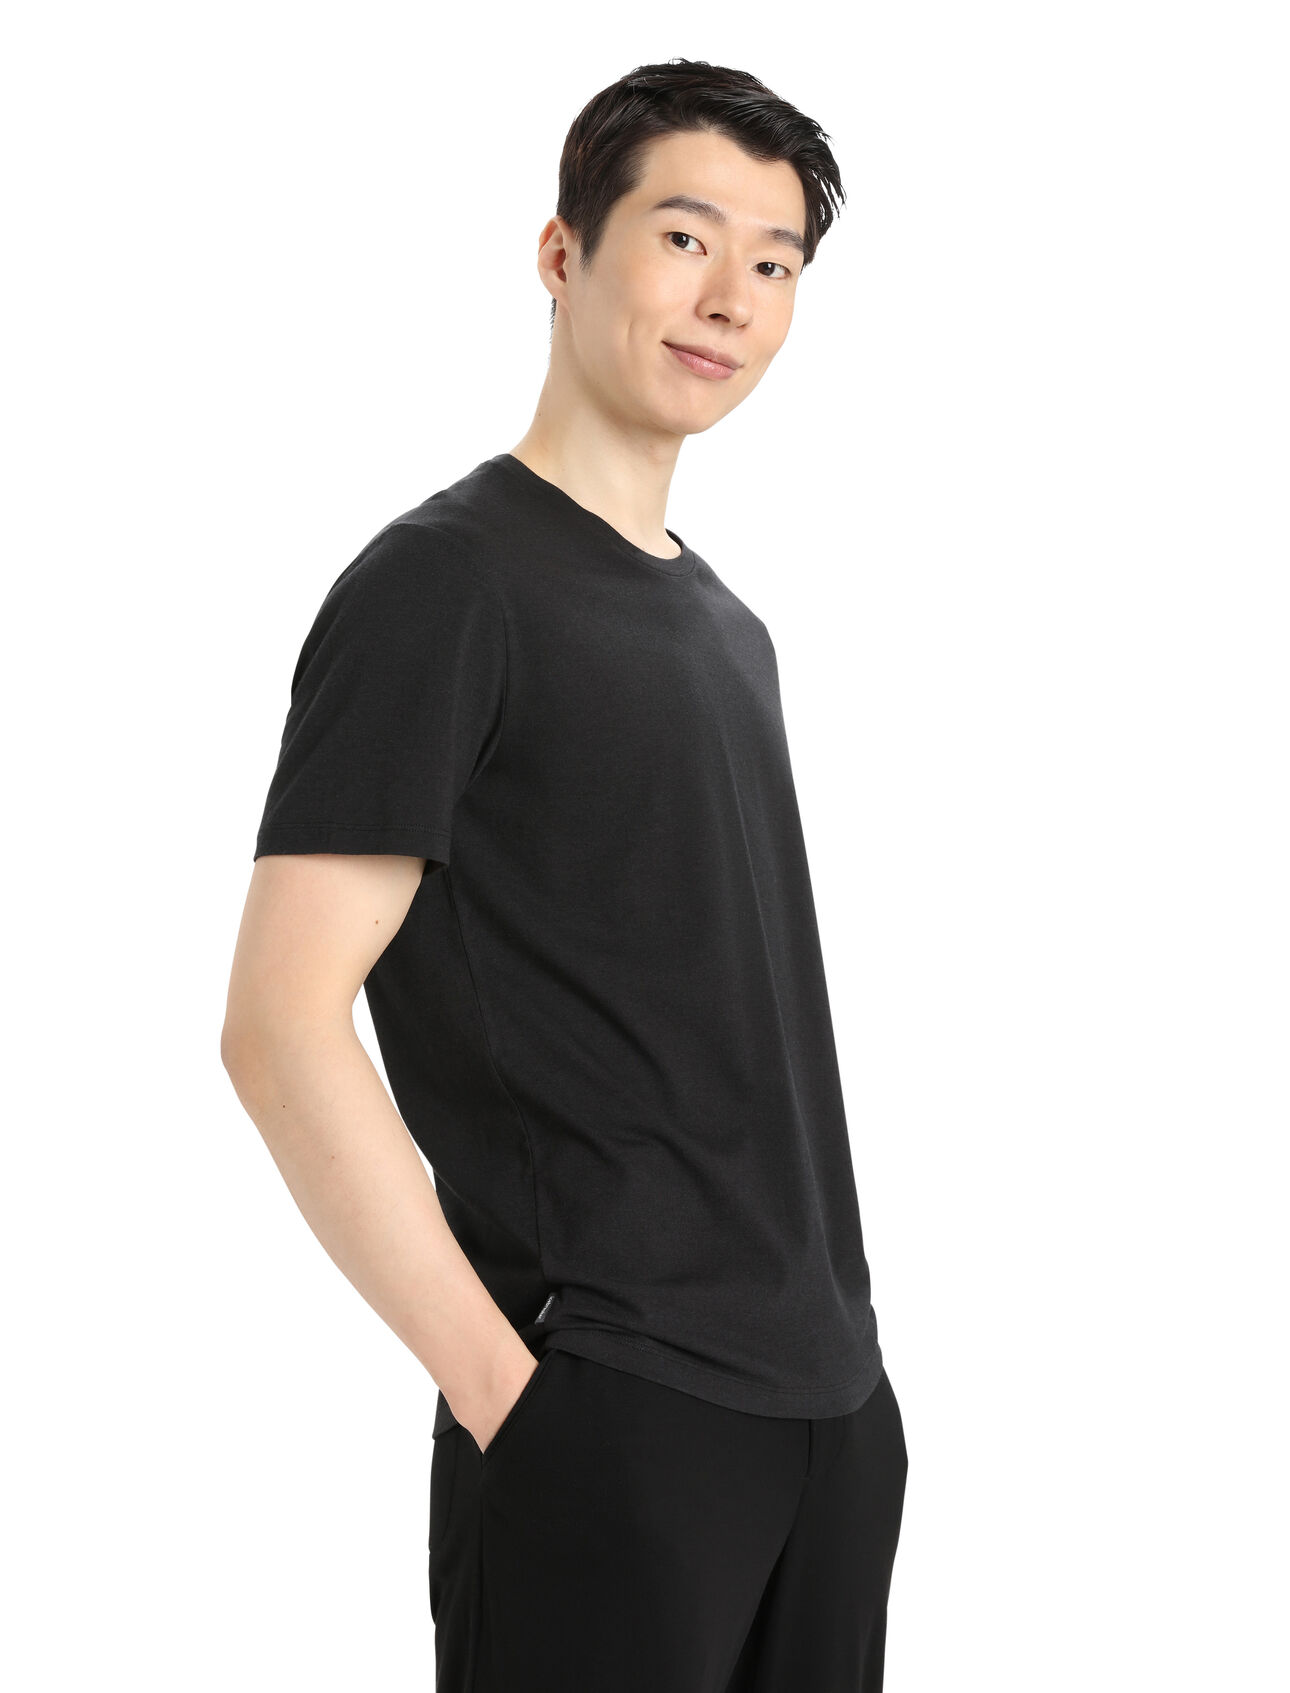 Mens Merino Central Classic Short Sleeve T-Shirt A versatile, everyday tee that goes anywhere in comfort, the Central Classic Short Sleeve Tee features a sustainable blend of natural merino wool and soft organic cotton.